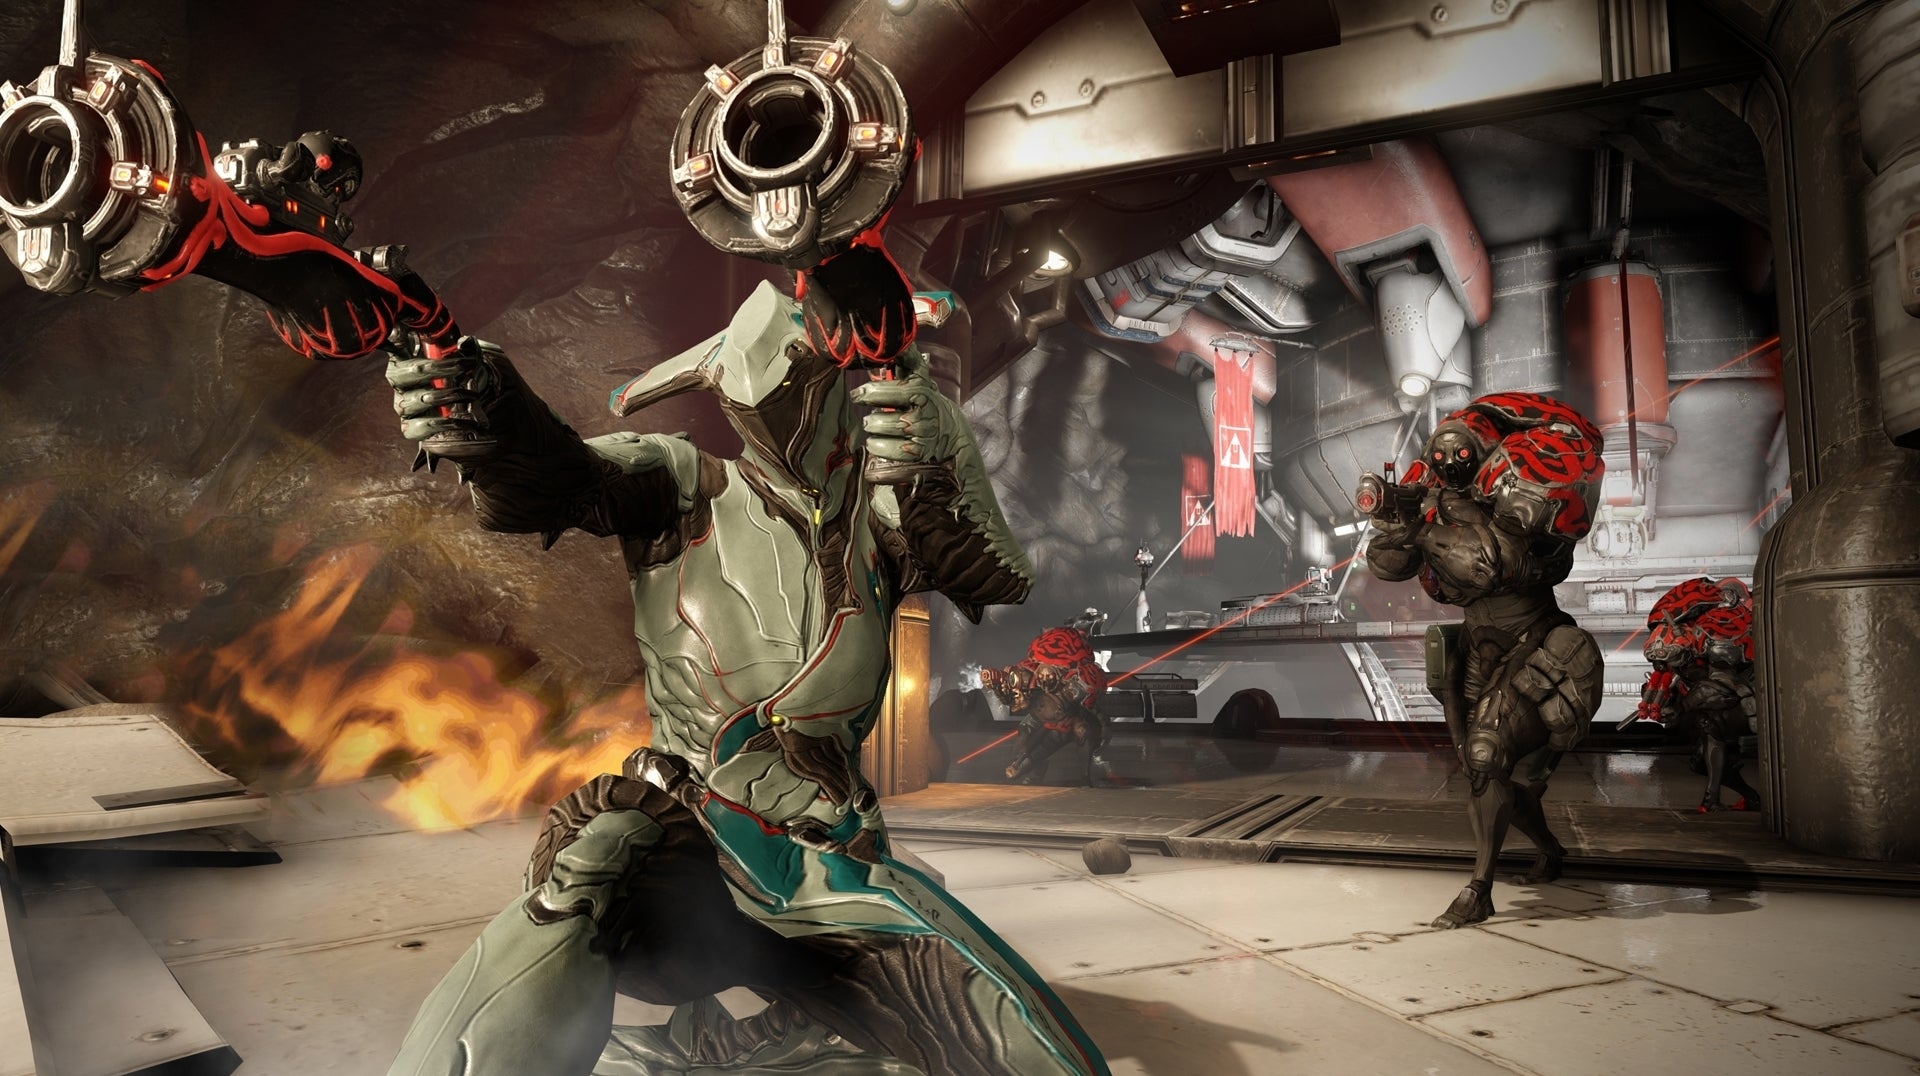 Image for Warframe dev insists it will remain "creatively independent" after Tencent buyout